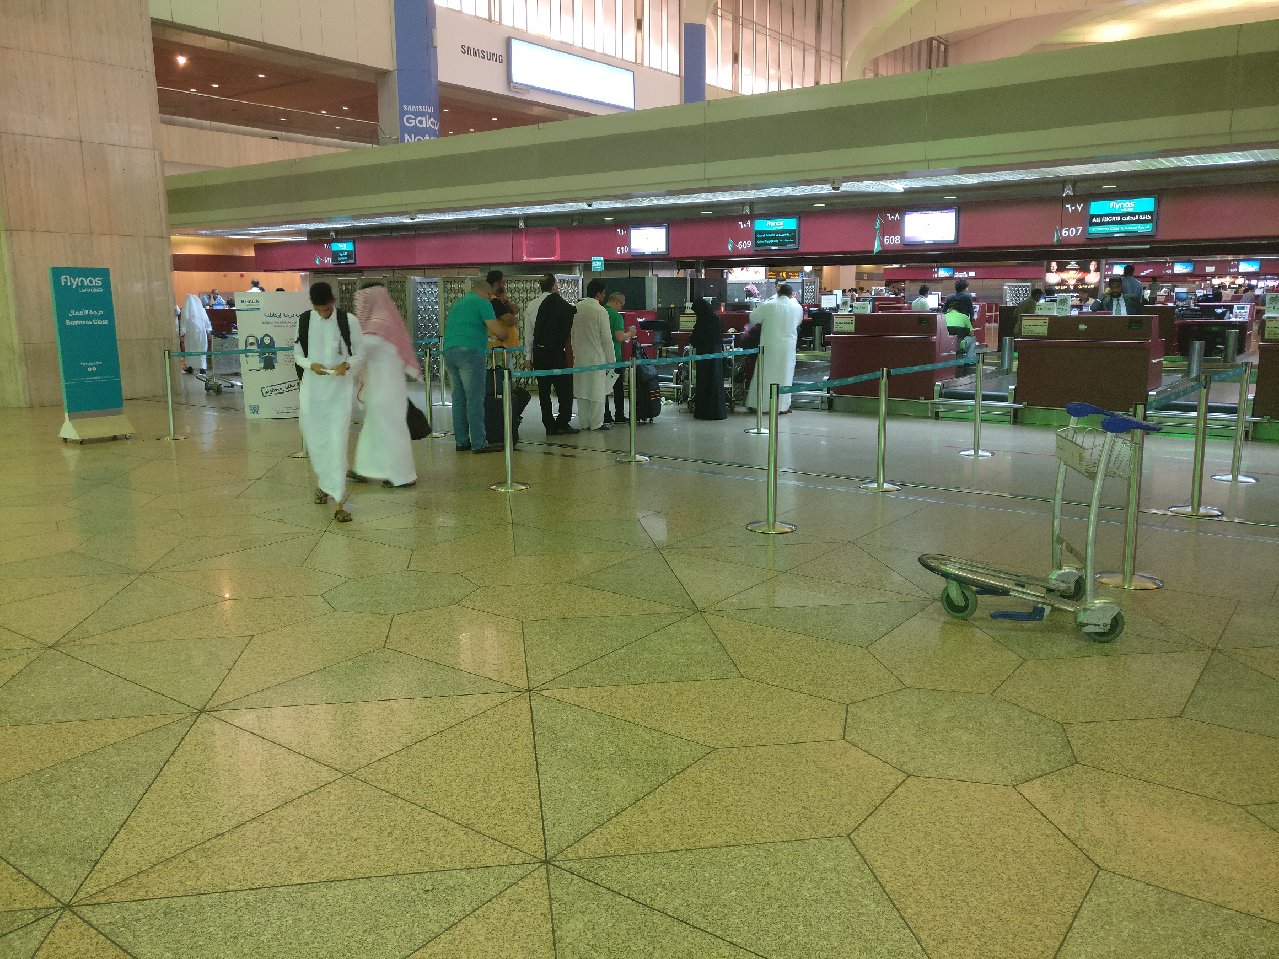 Flynas check-in